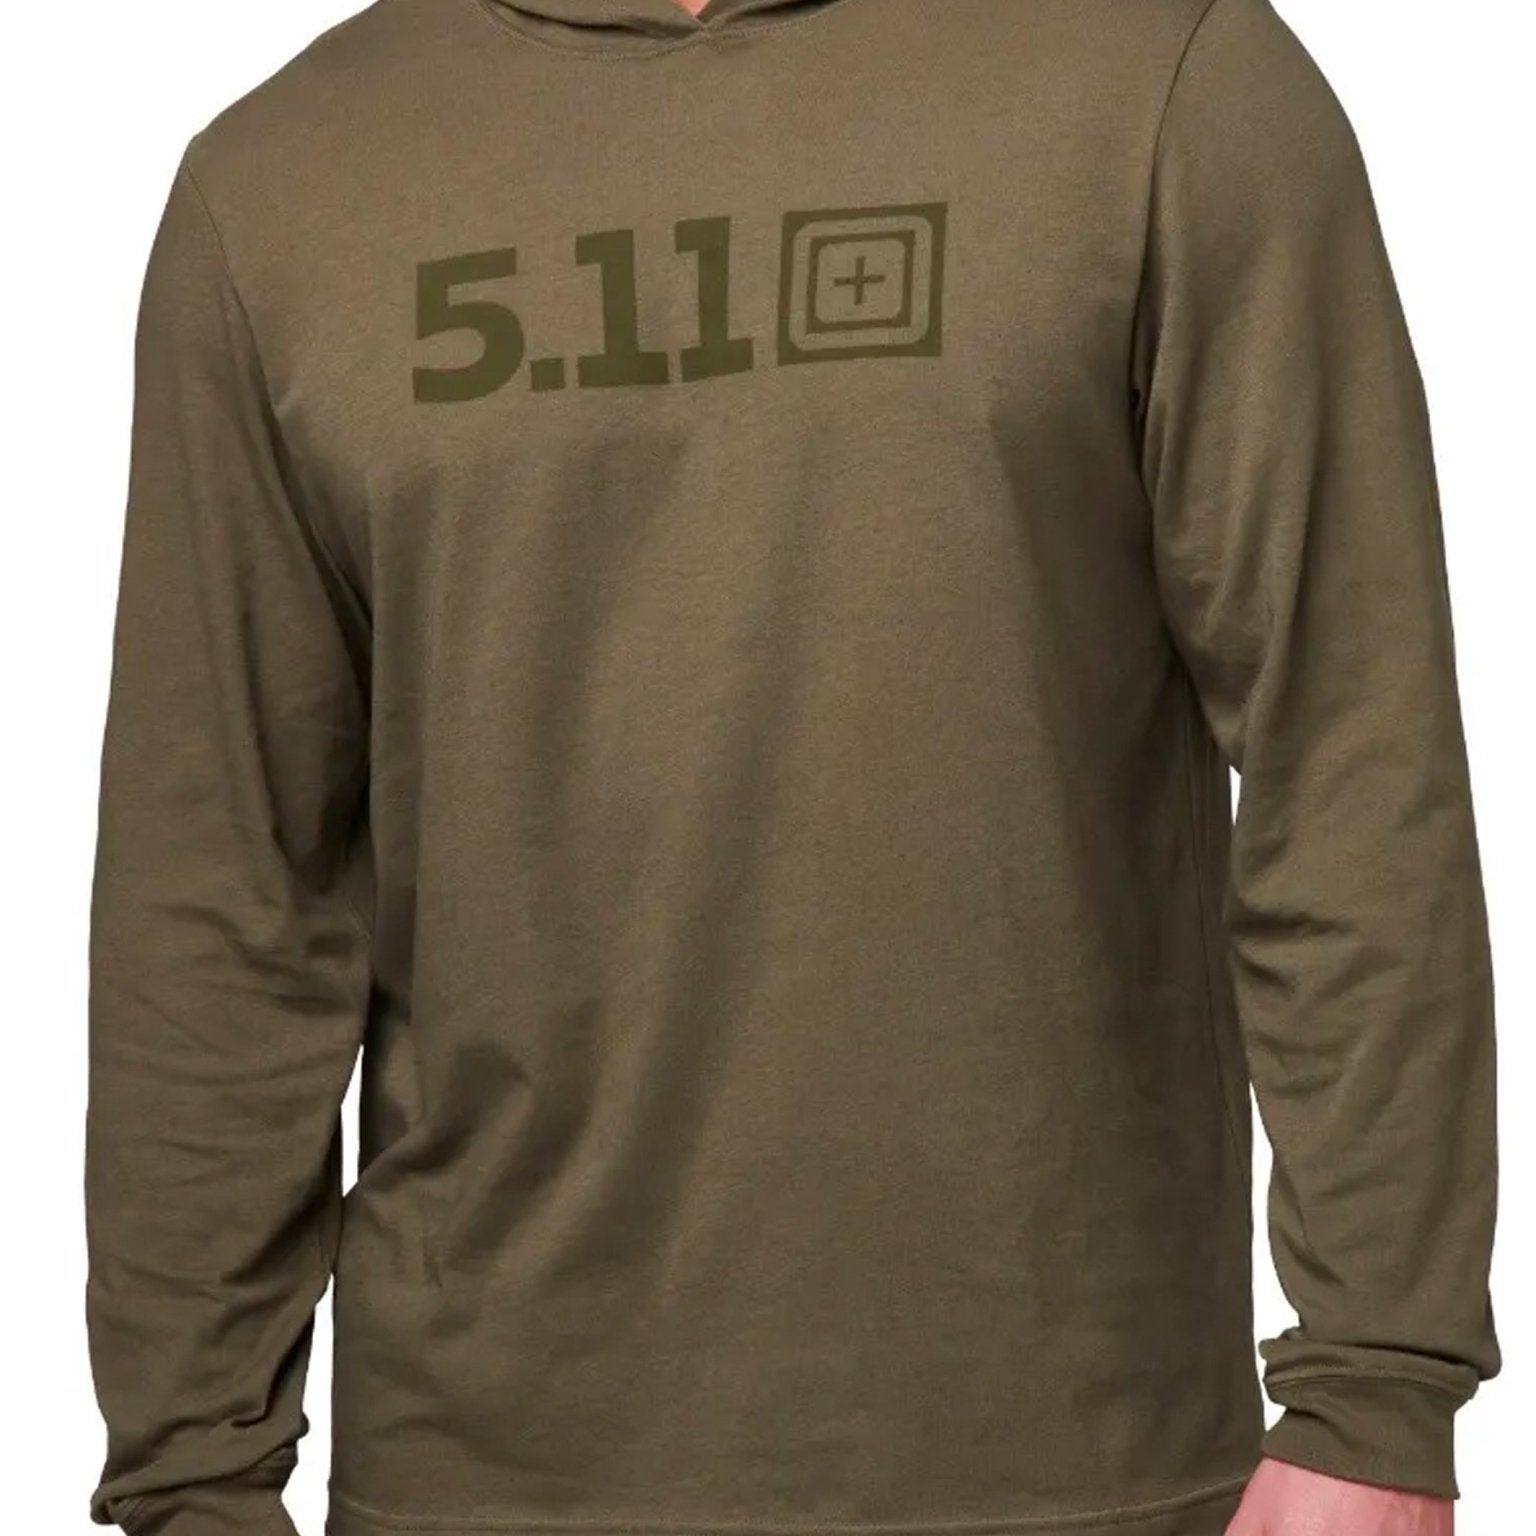 4elementsclothing5.11 Tactical5.11 Tactical - 5.11 HOODED LONG SLEEVE TEE Cotton Polyester moisture wicking - Style 76165T-Shirt76165-186-S